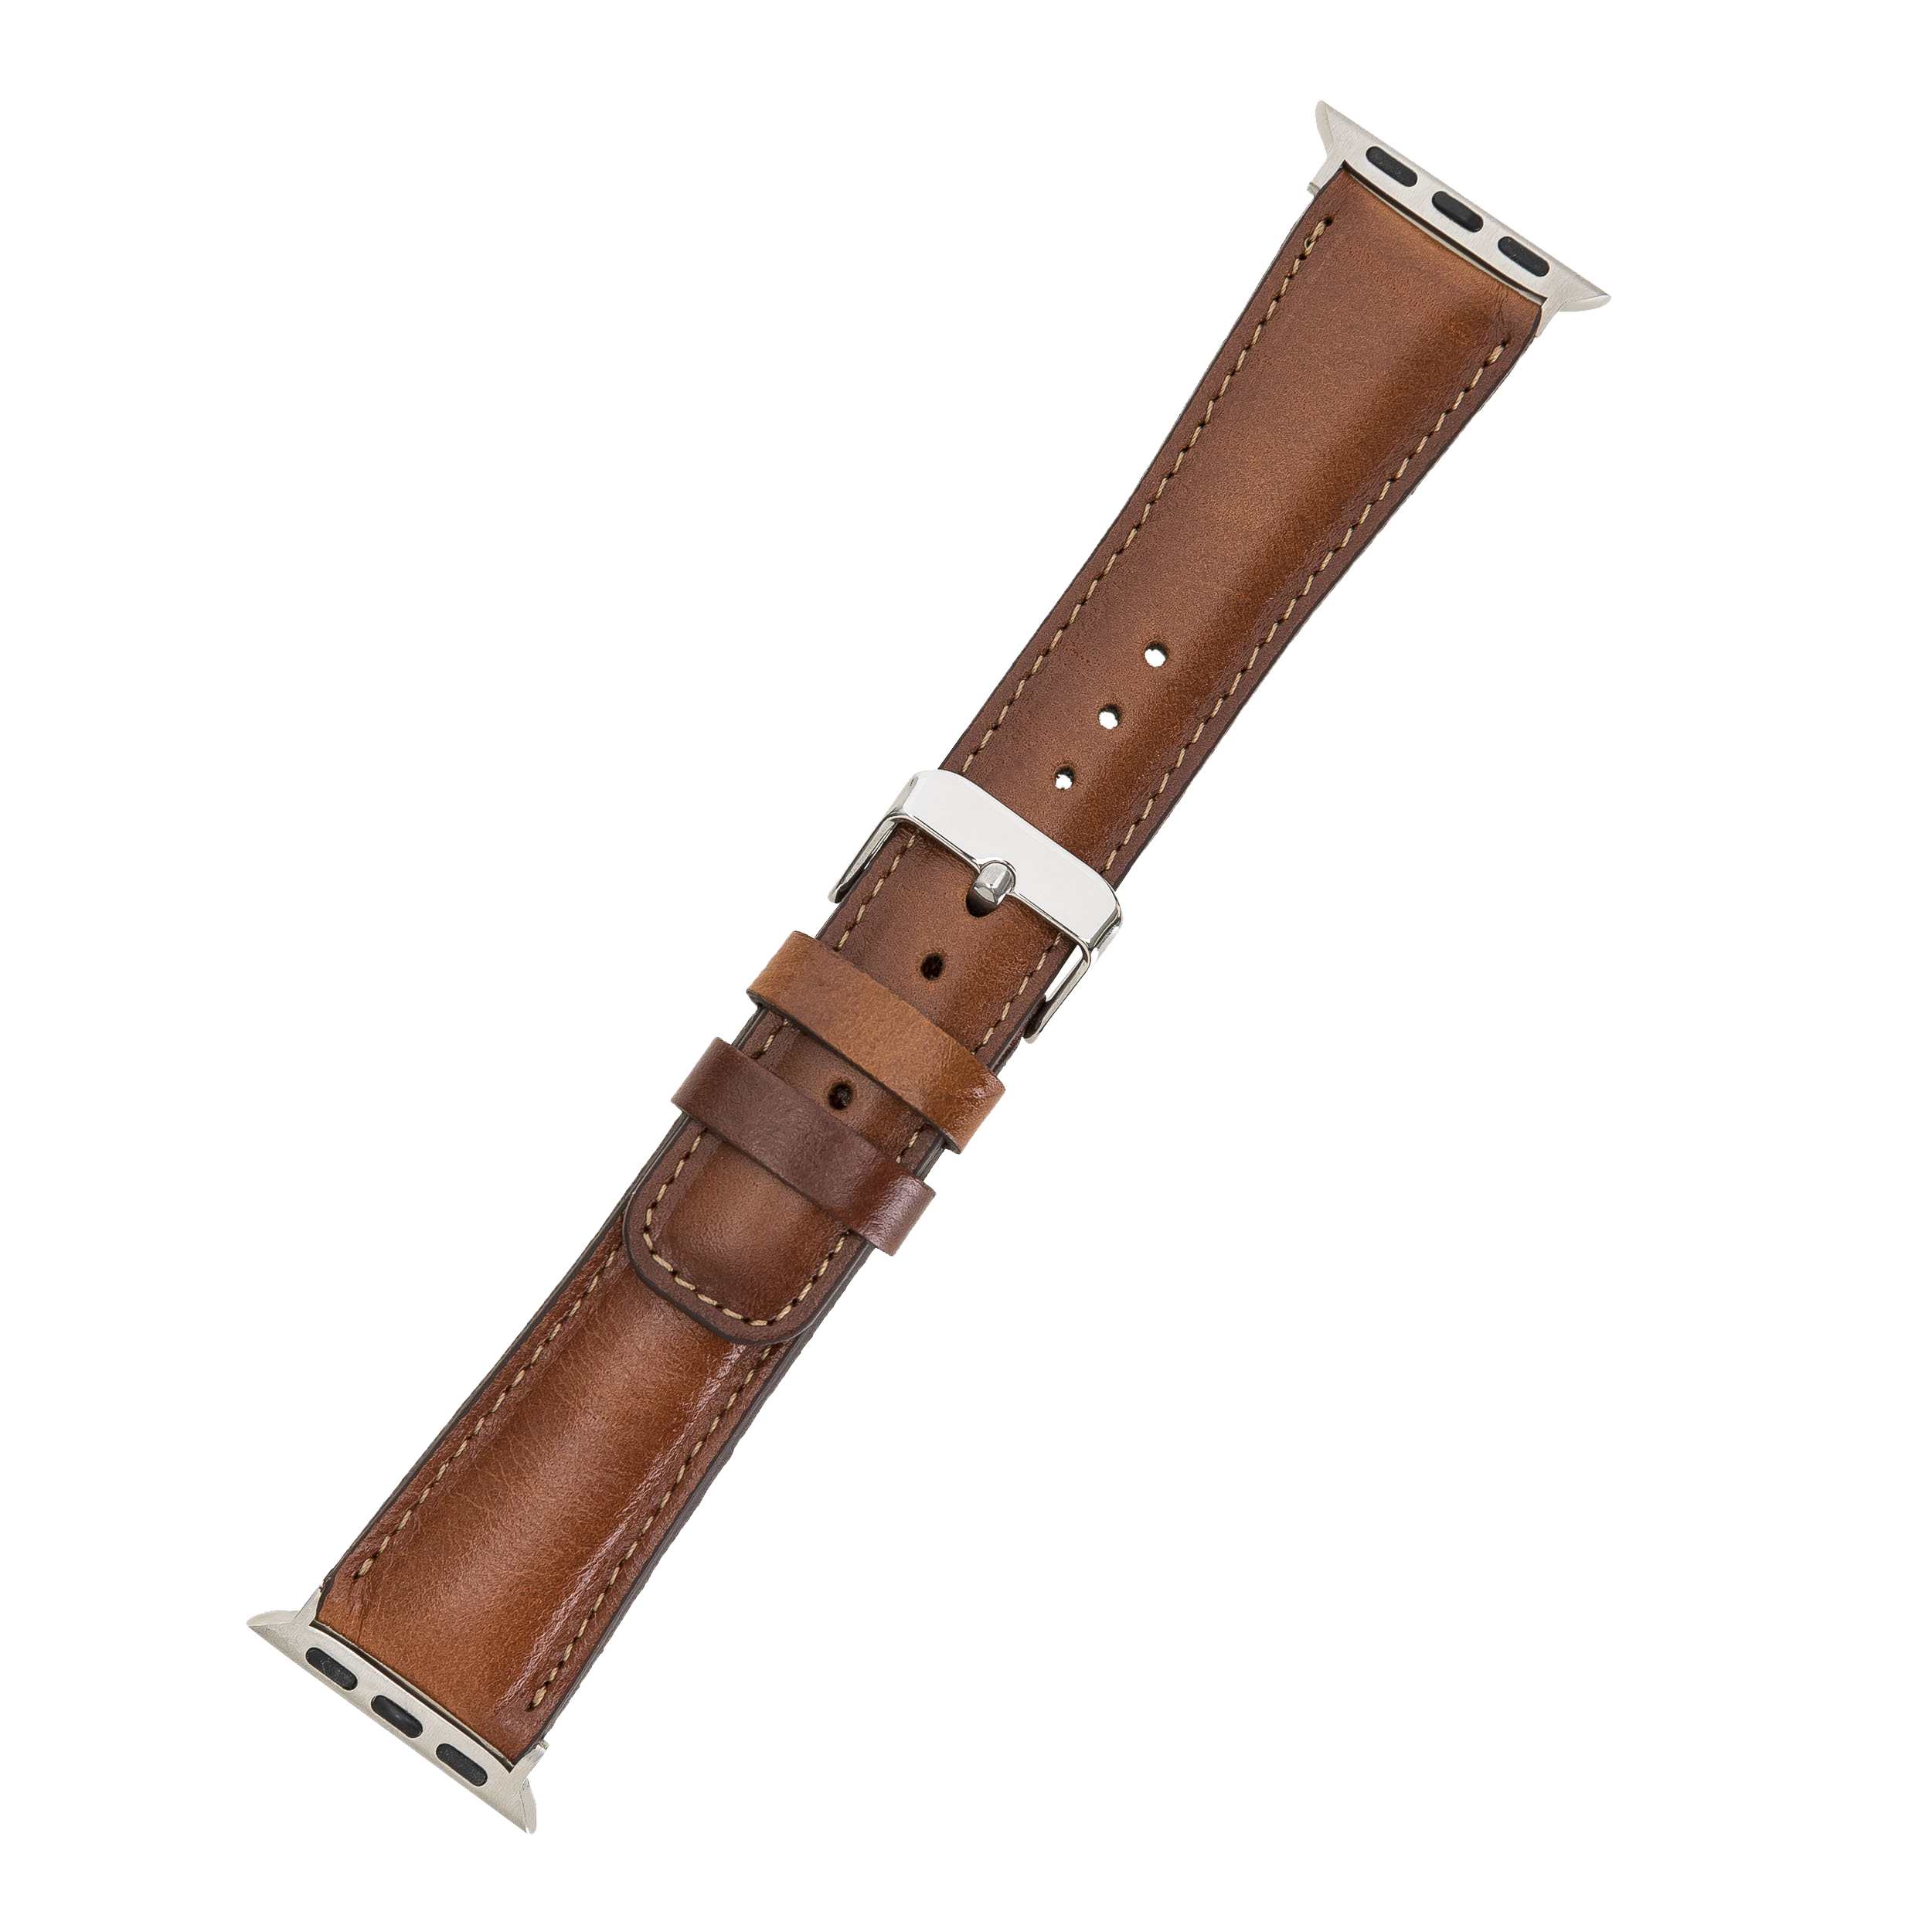 DelfiCase Liverpool Collection Leather Watch Band for Apple & Fitbit Versa Watch Band 18